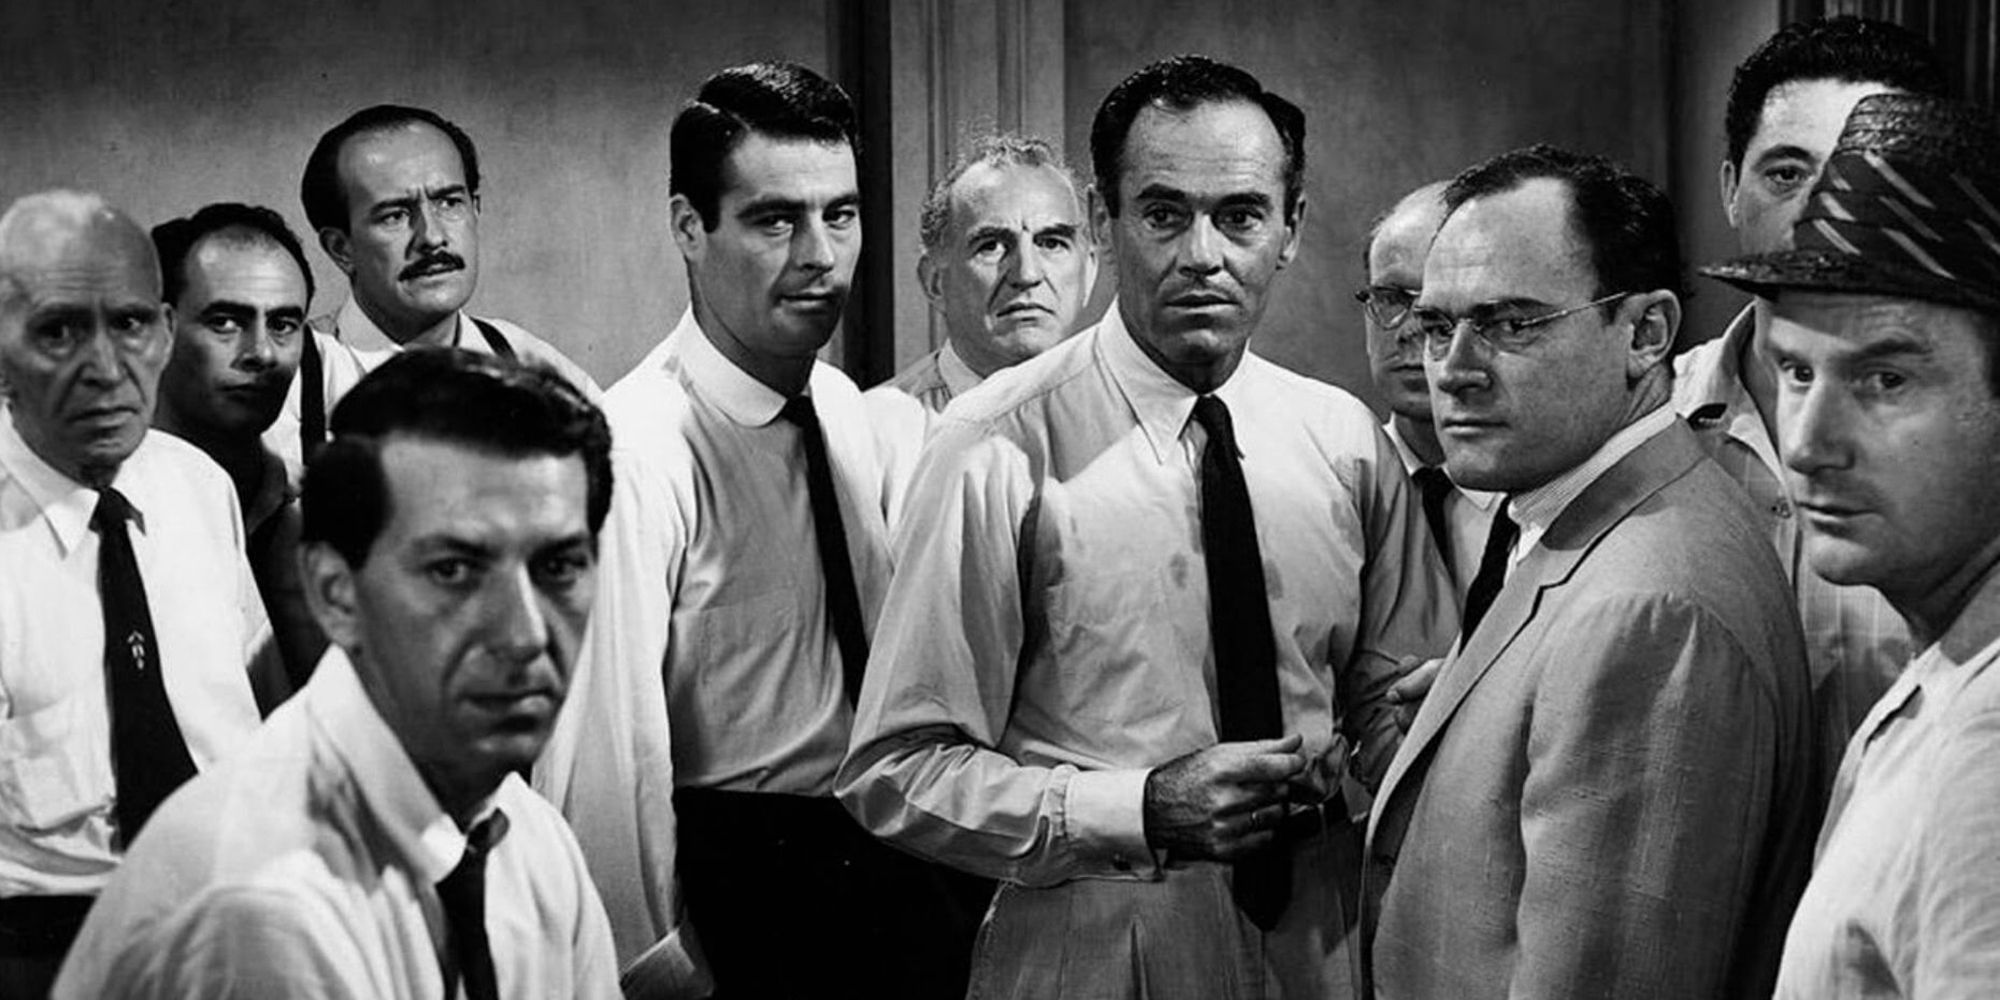 The cast of 12 Angry Men looking in the same direction.